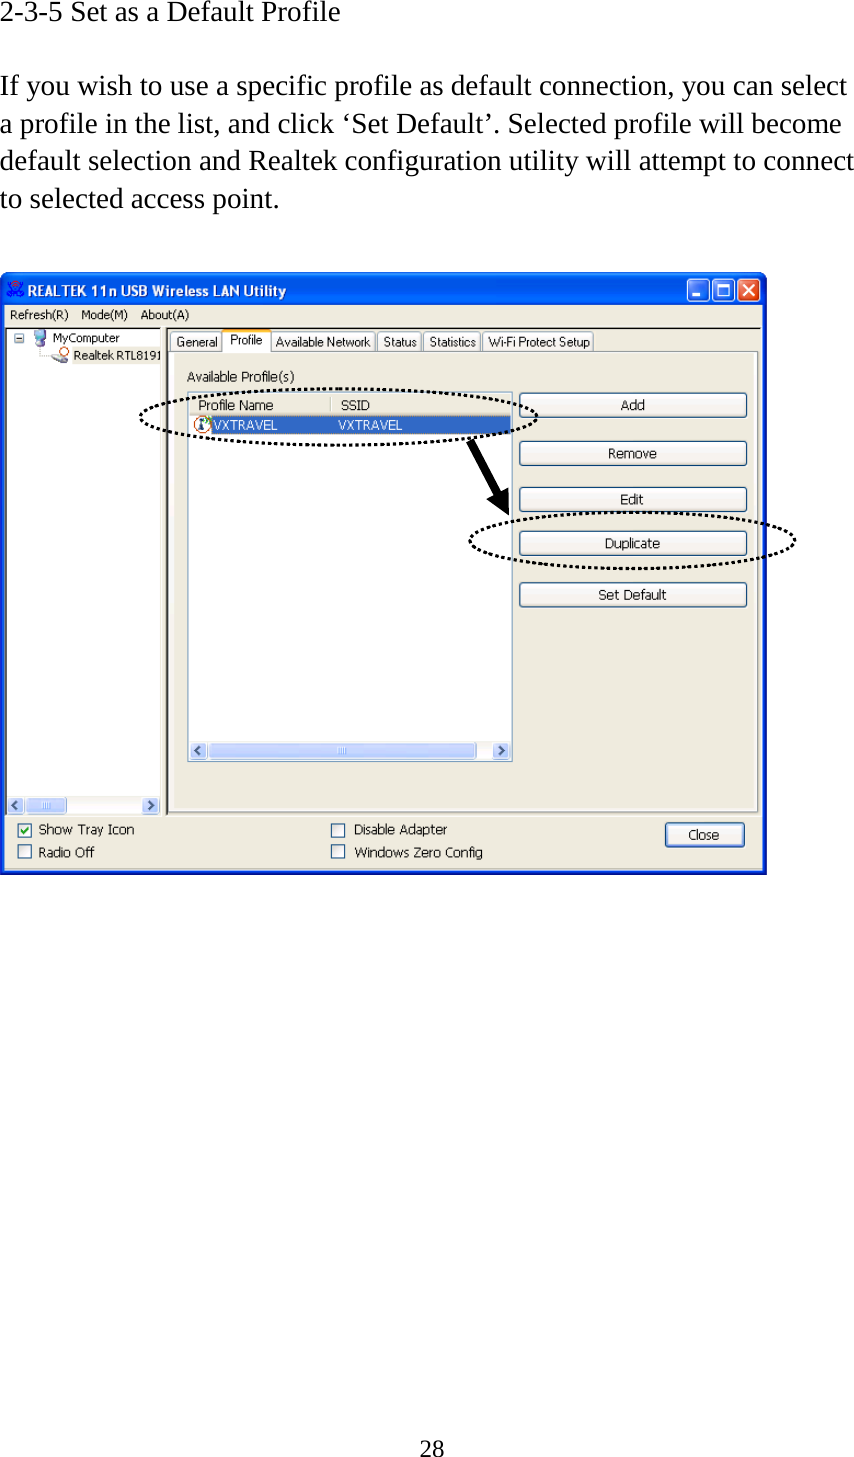 28  2-3-5 Set as a Default Profile  If you wish to use a specific profile as default connection, you can select a profile in the list, and click ‘Set Default’. Selected profile will become default selection and Realtek configuration utility will attempt to connect to selected access point.              